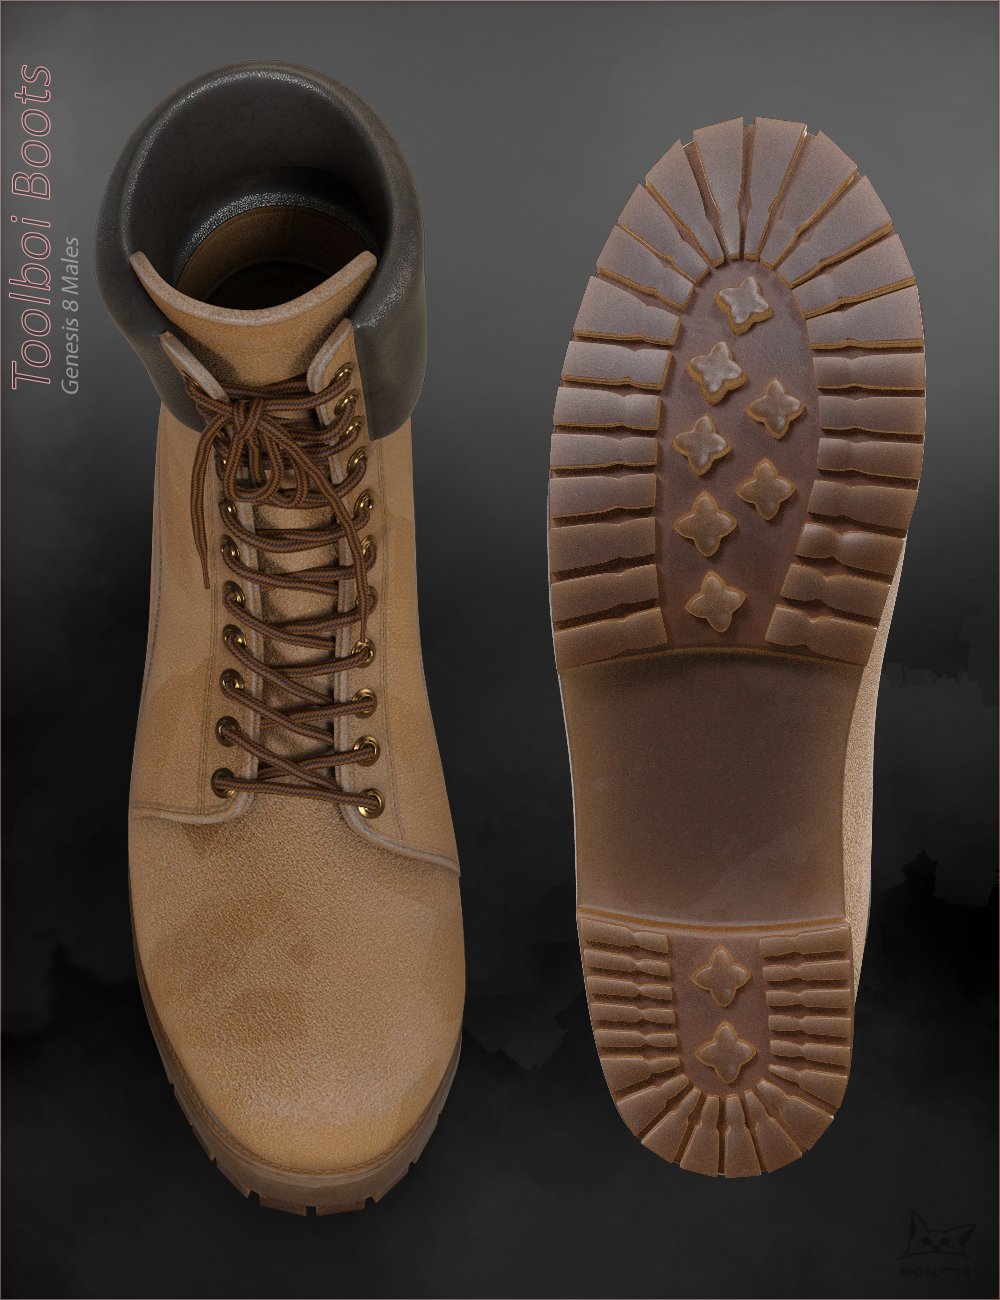 Toolboi Boots for Genesis 8 Males by: BadKitteh Co, 3D Models by Daz 3D